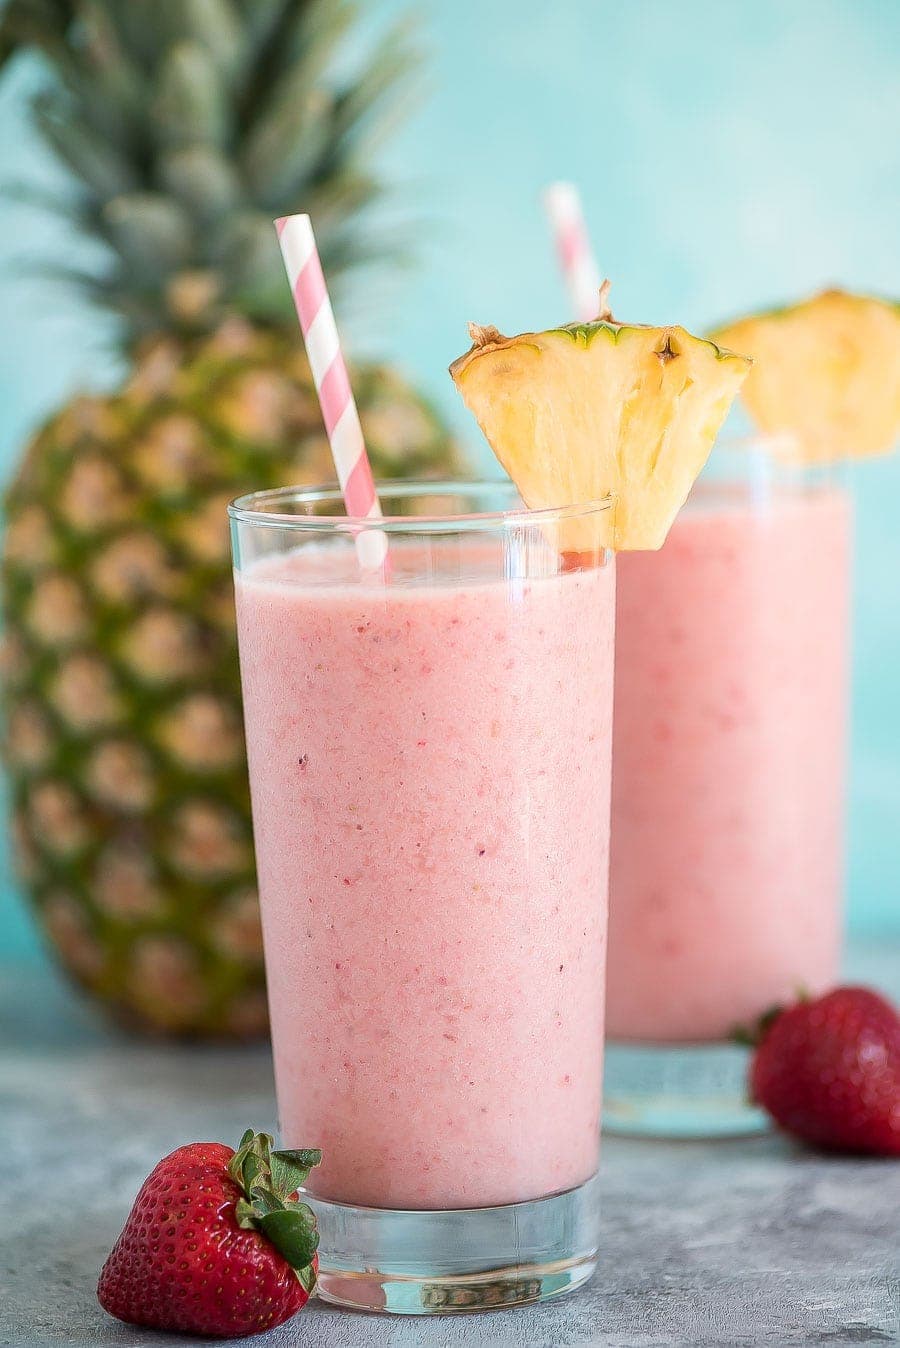 Peach smoothie - aloha tropical smoothie garnished with a slice of pineapple and a pink and white striped straw.